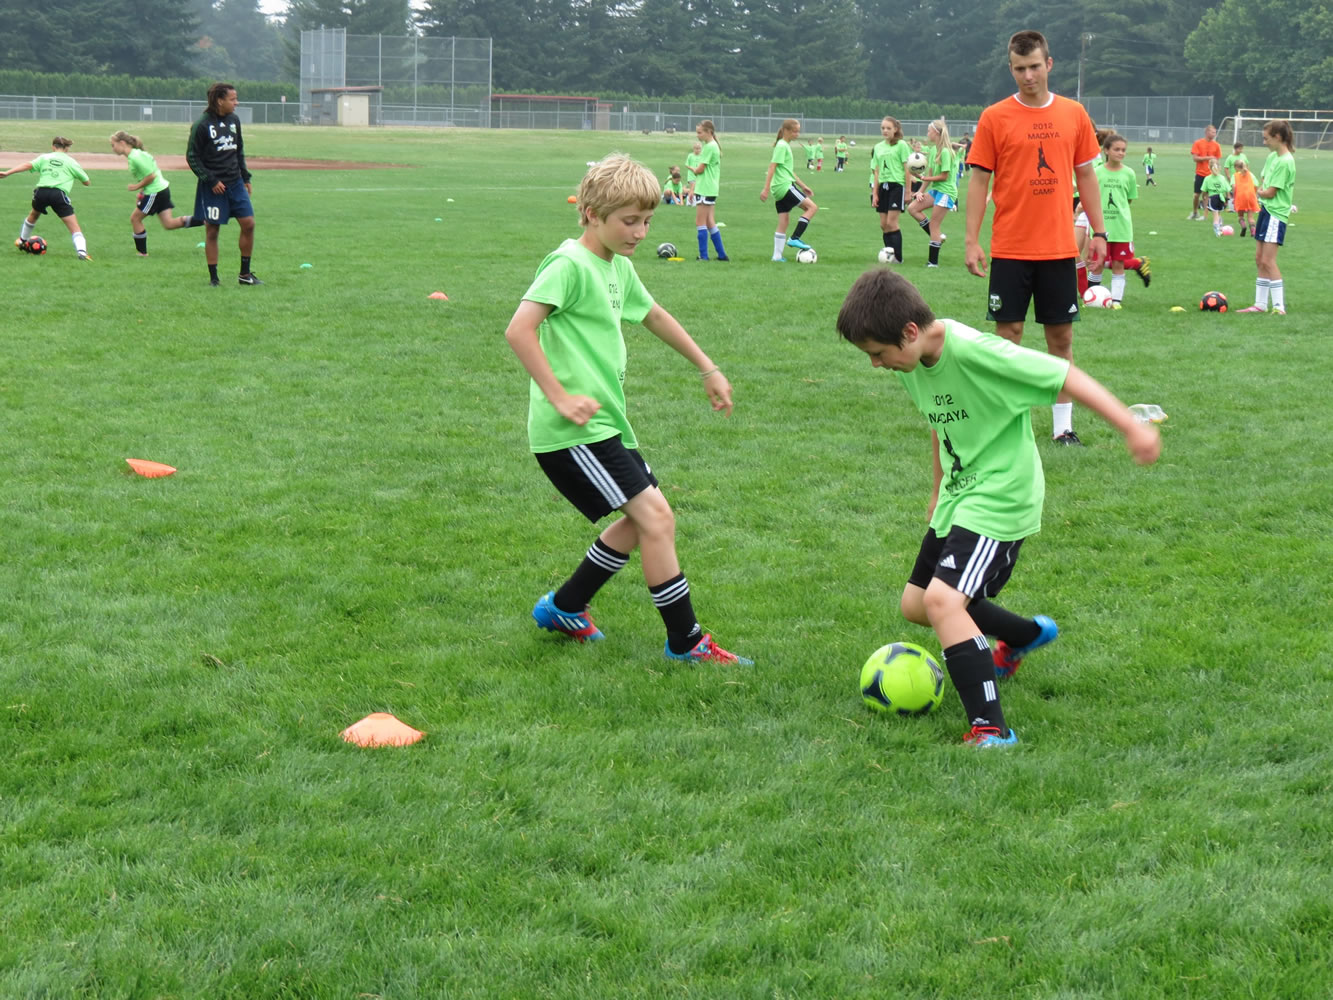 More than 100 youth participated in the Dan Macaya Soccer Camp last week at the Ione Street fields in Camas. When Macaya, who played soccer at and graduated from Camas High School and Concordia University, first started the event nine years ago 15 kids attended.